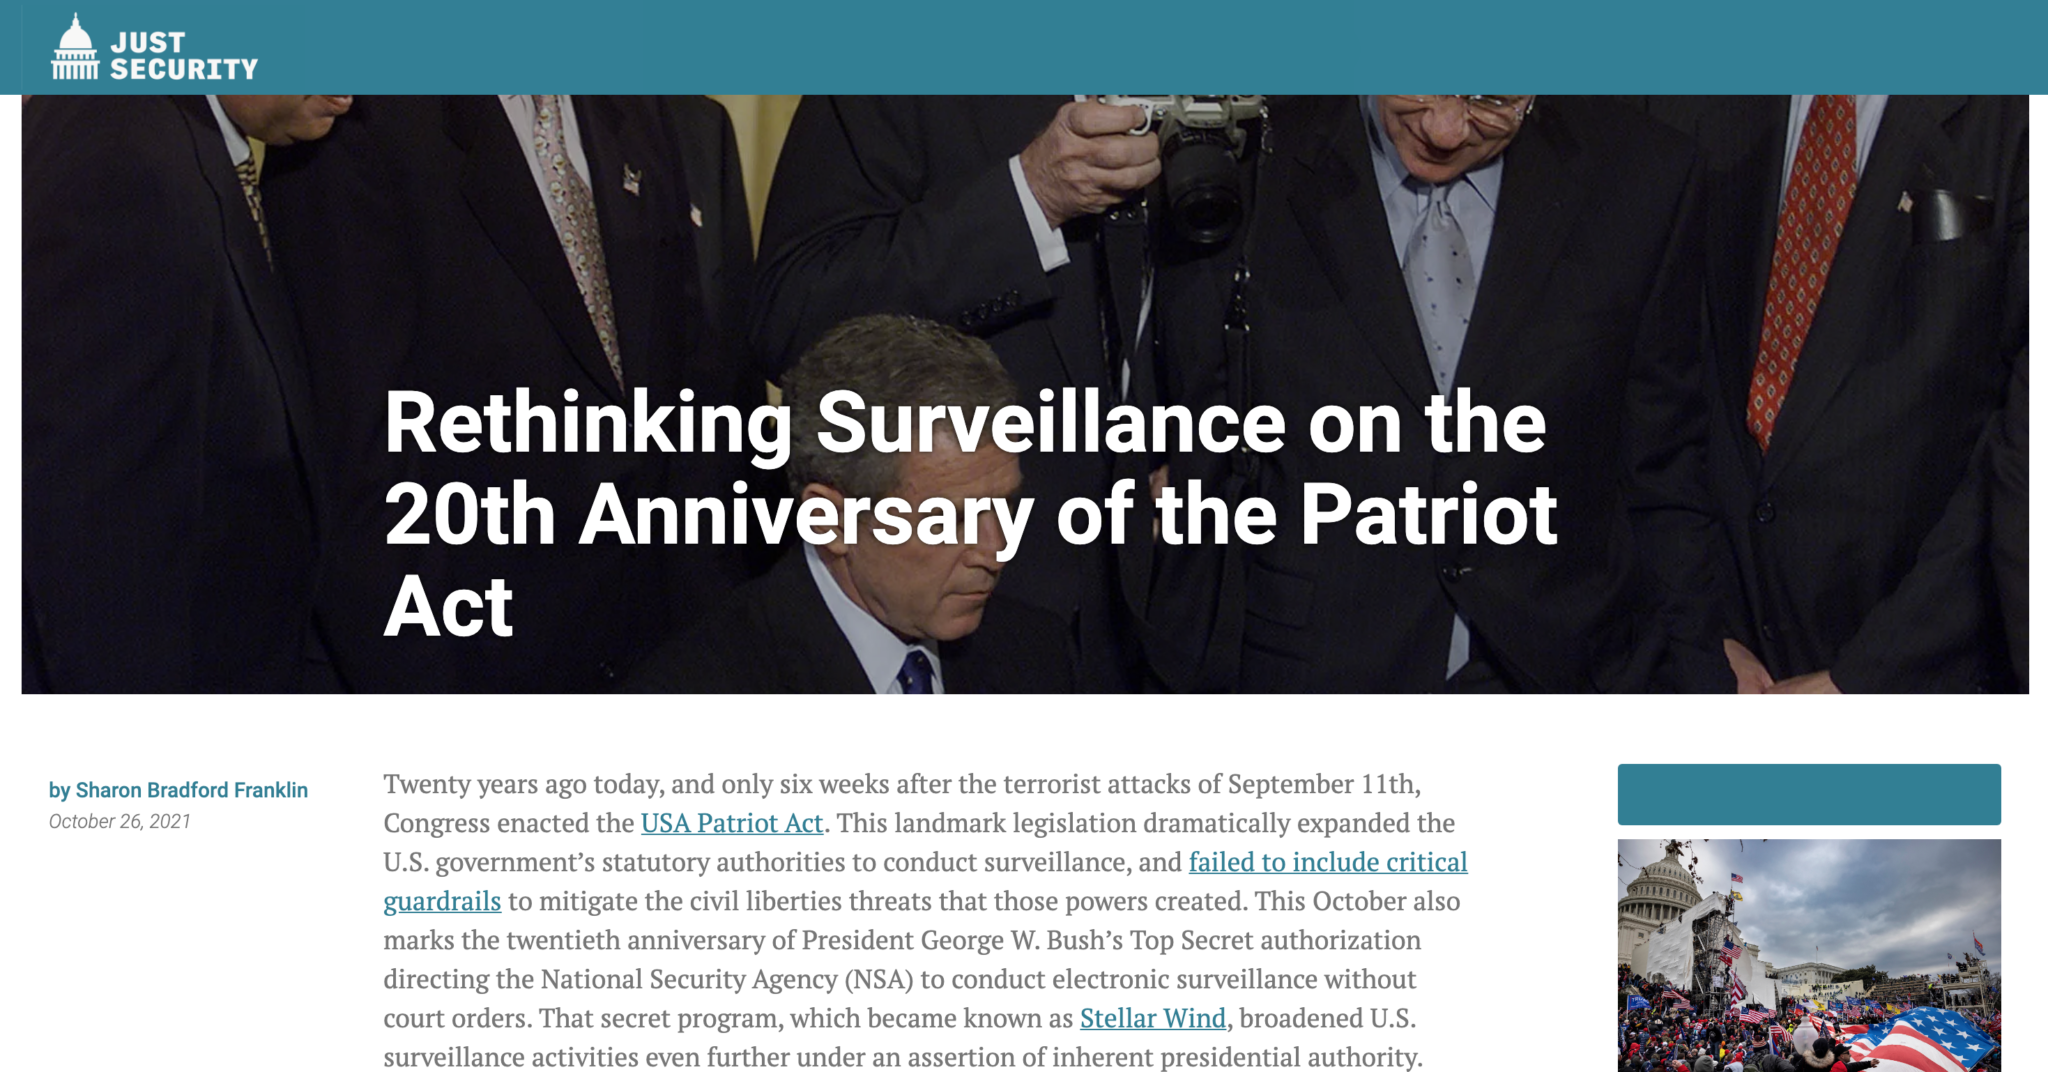 Just Security Rethinking Surveillance on the 20th Anniversary of the